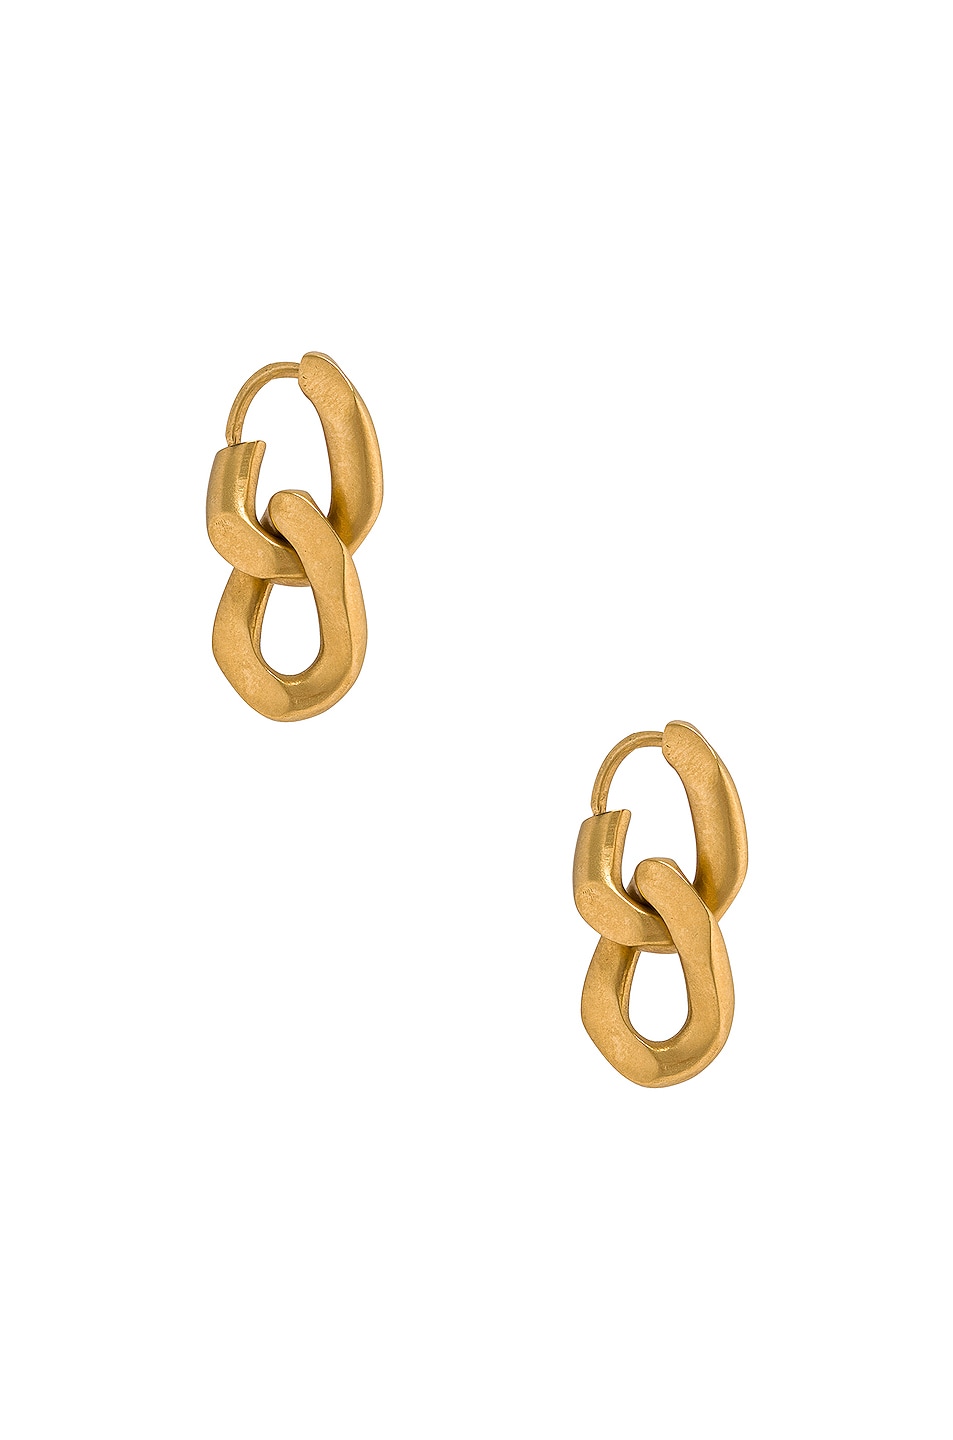 Image 1 of Maison Margiela Chain Earrings in Yellow Gold Plating